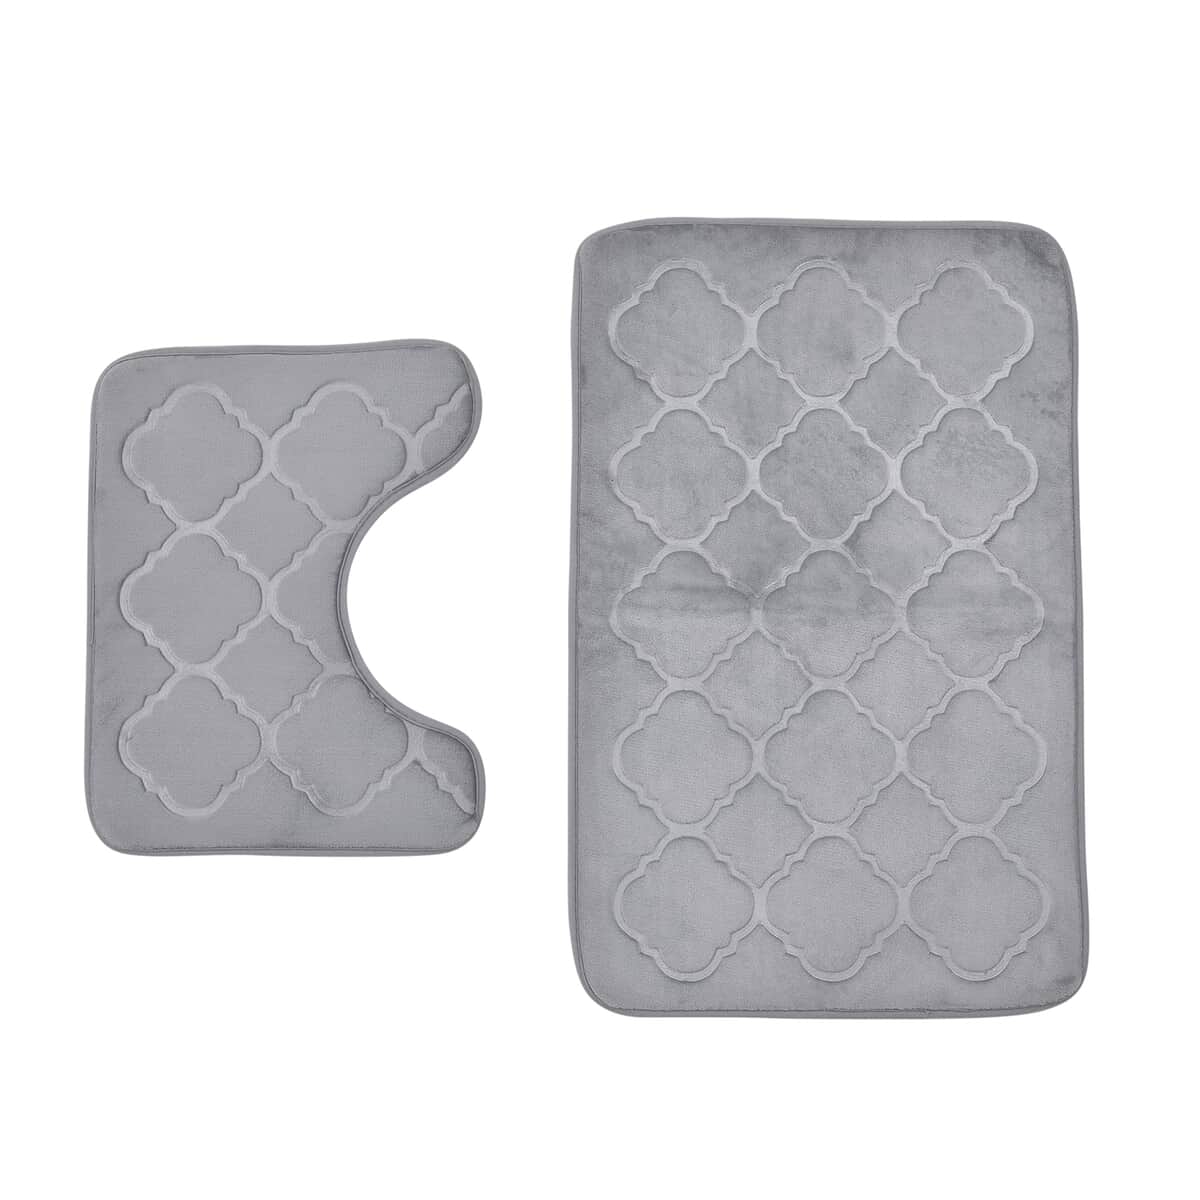 Gray Embossed Flannel Rectangular Bathmat and Contour Toilet Mat image number 0